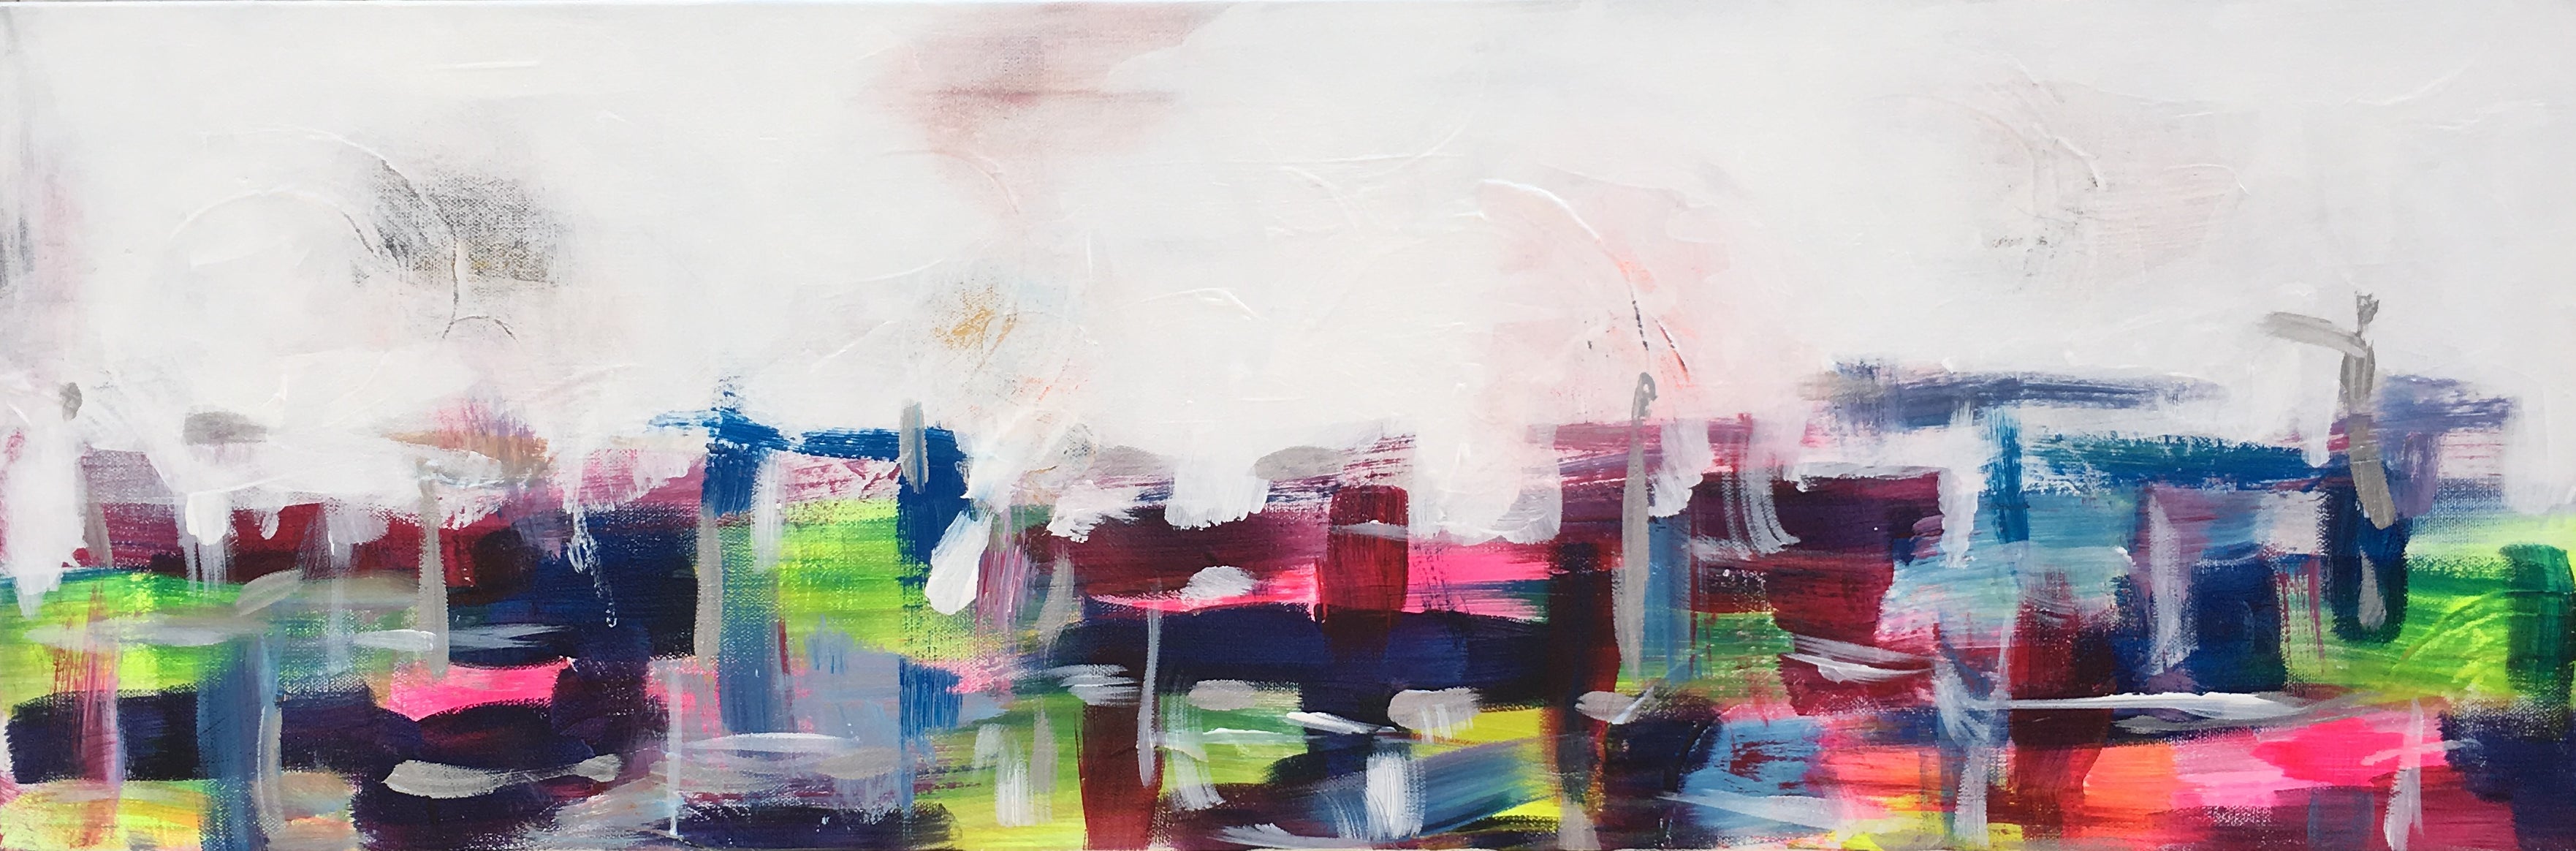 Abstract and modern acrylic painting of spring in the City by Alison Corteen, artbyalisonc.